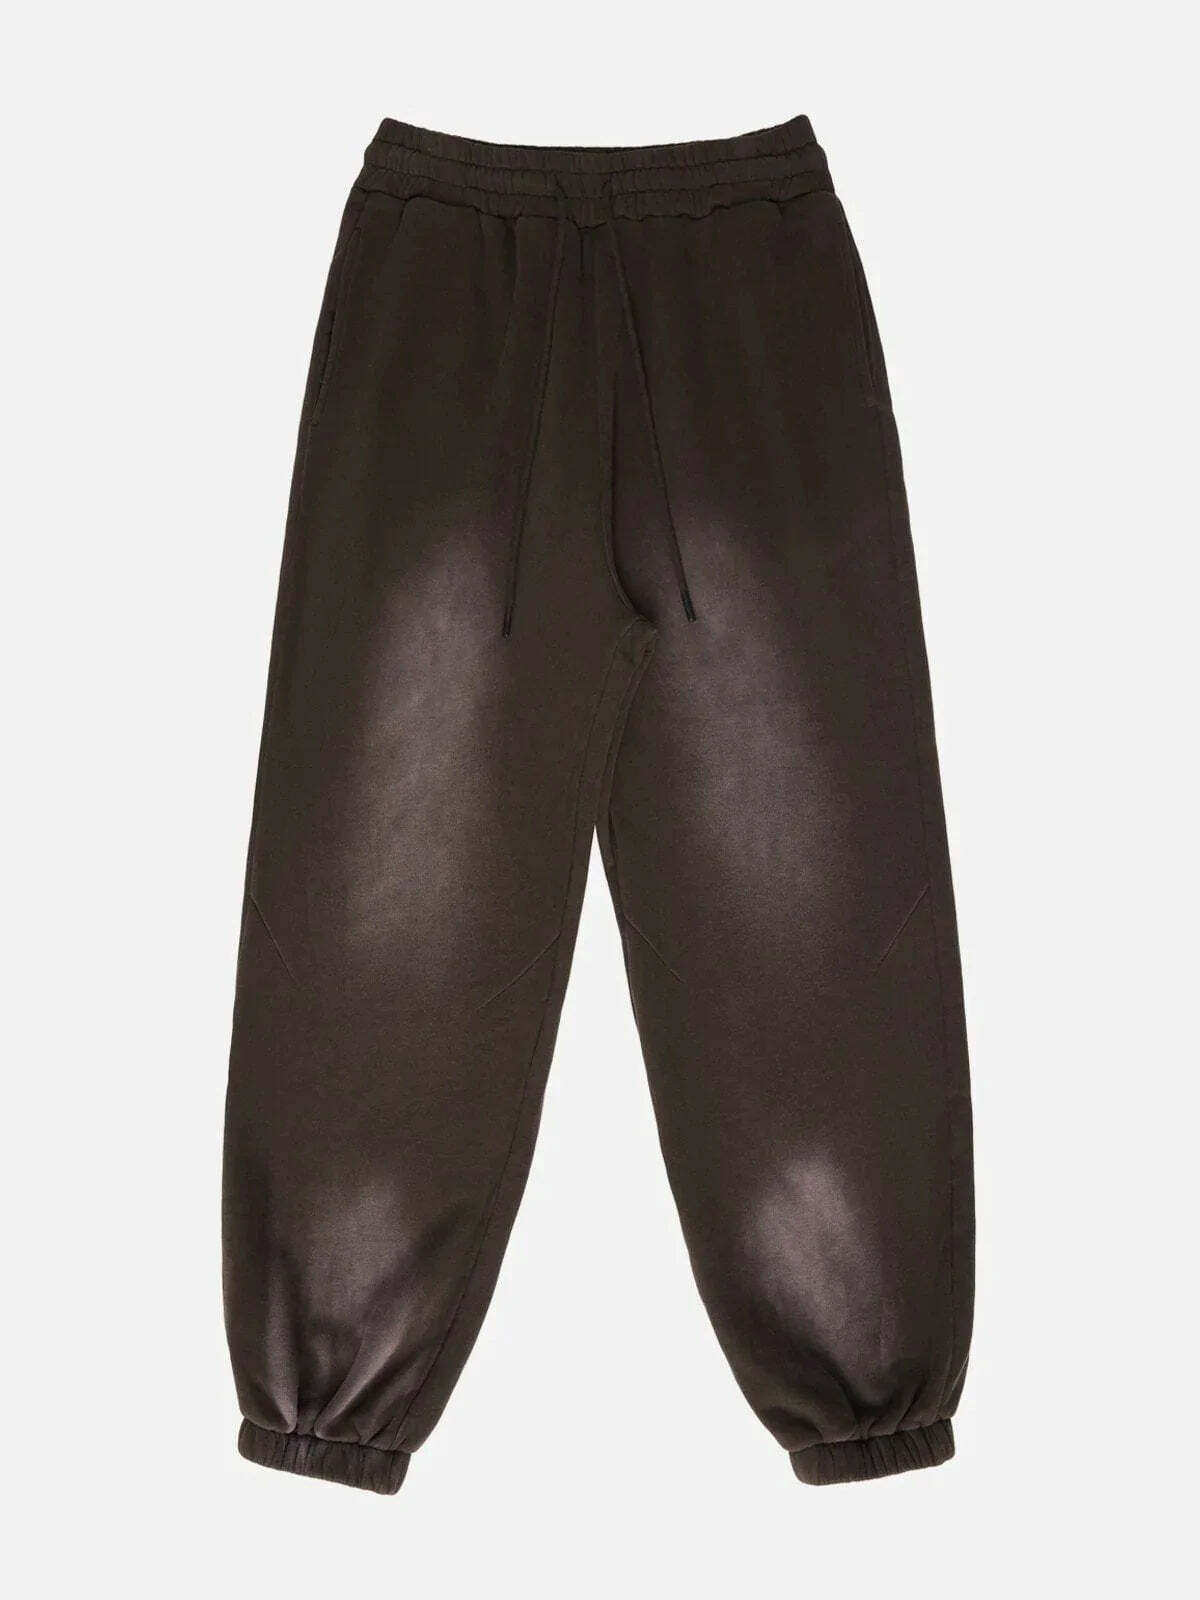 youthful smudged feet pants edgy & trendy streetwear 6769